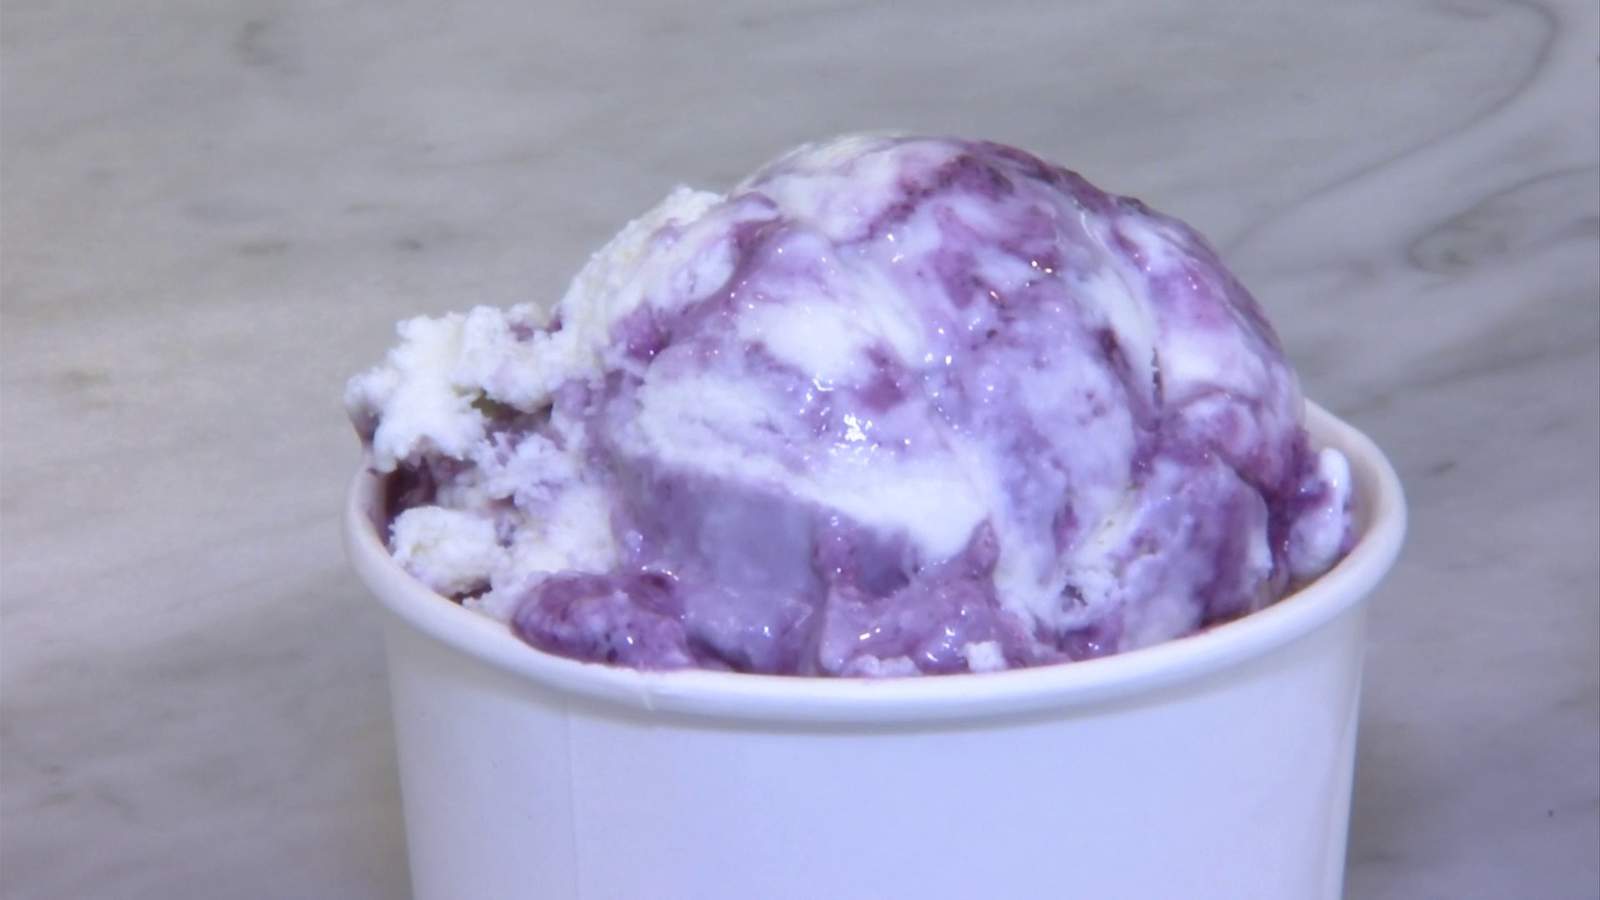 Tasty Tuesday: Blue Cow Ice Cream keeps classics, adds more culinary flavors to the mix